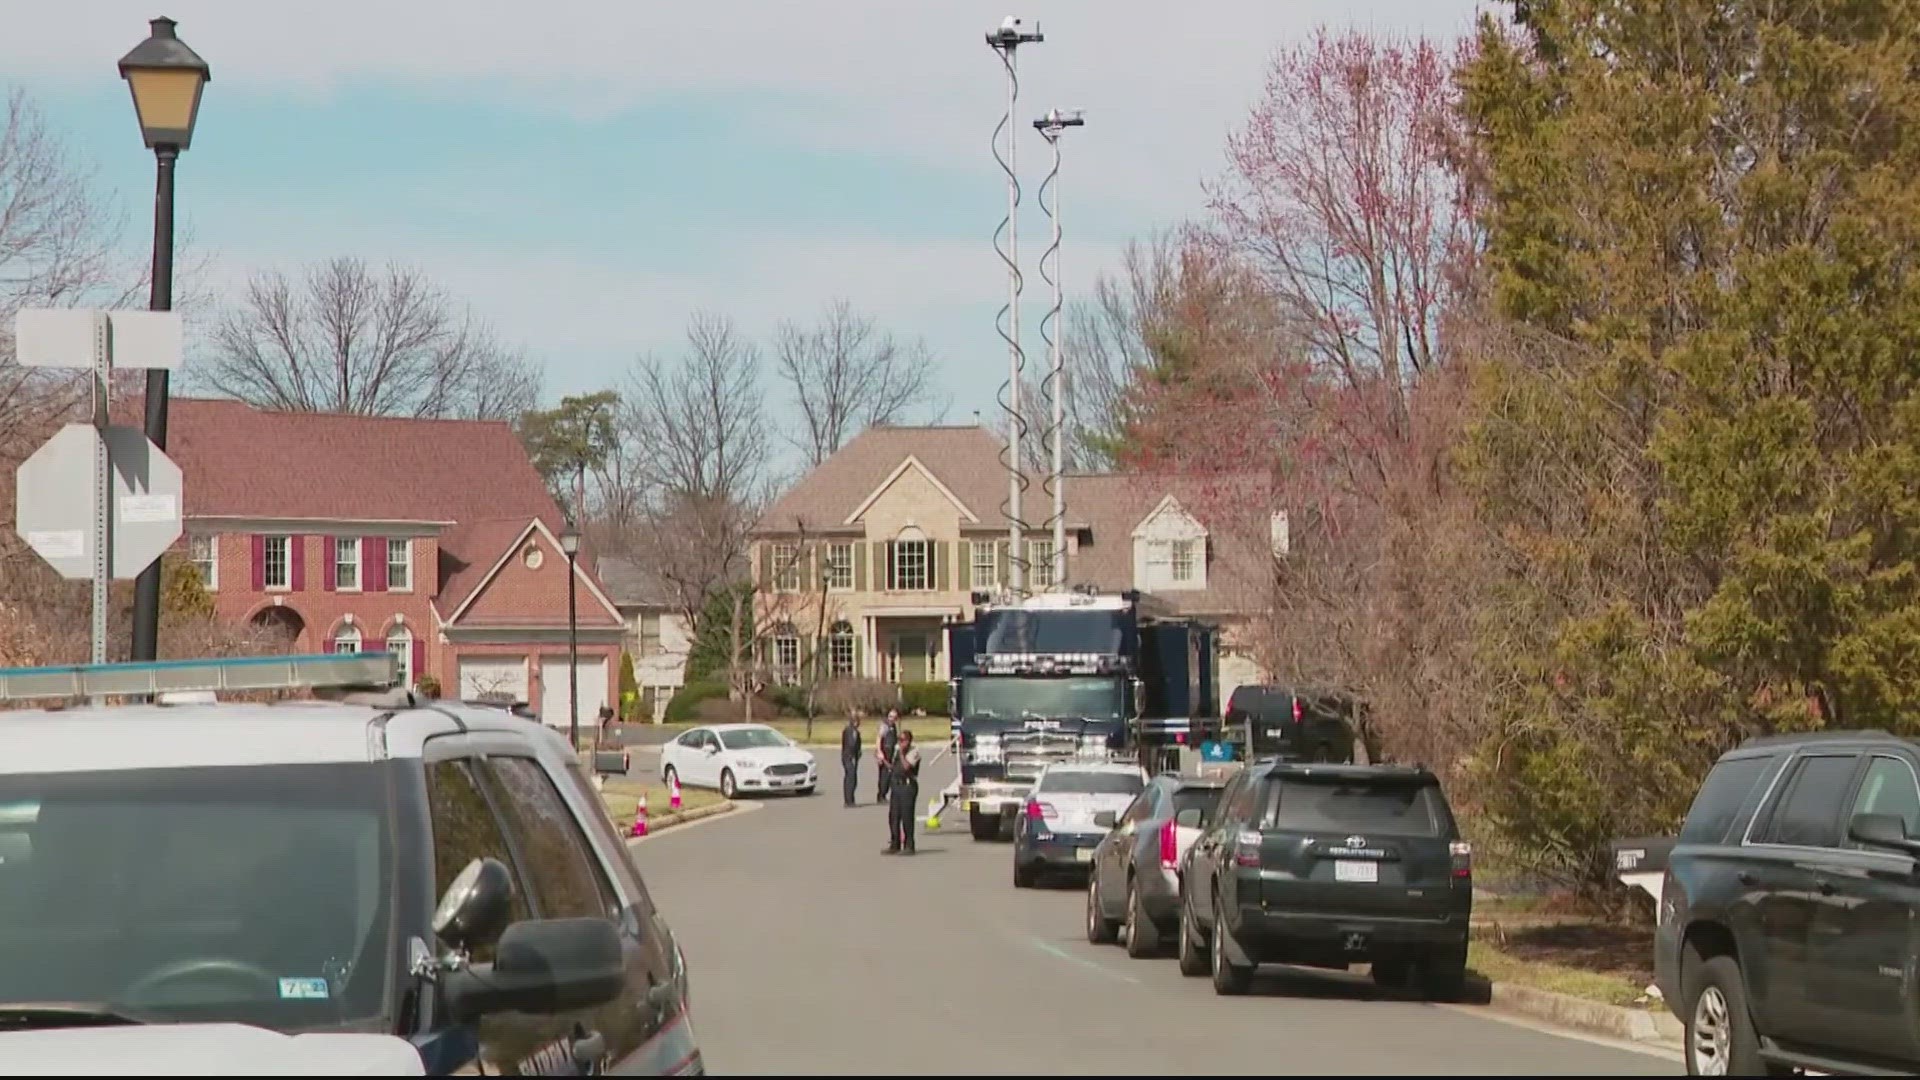 The two people were killed inside of a home near the Hattontown neighborhood in February.